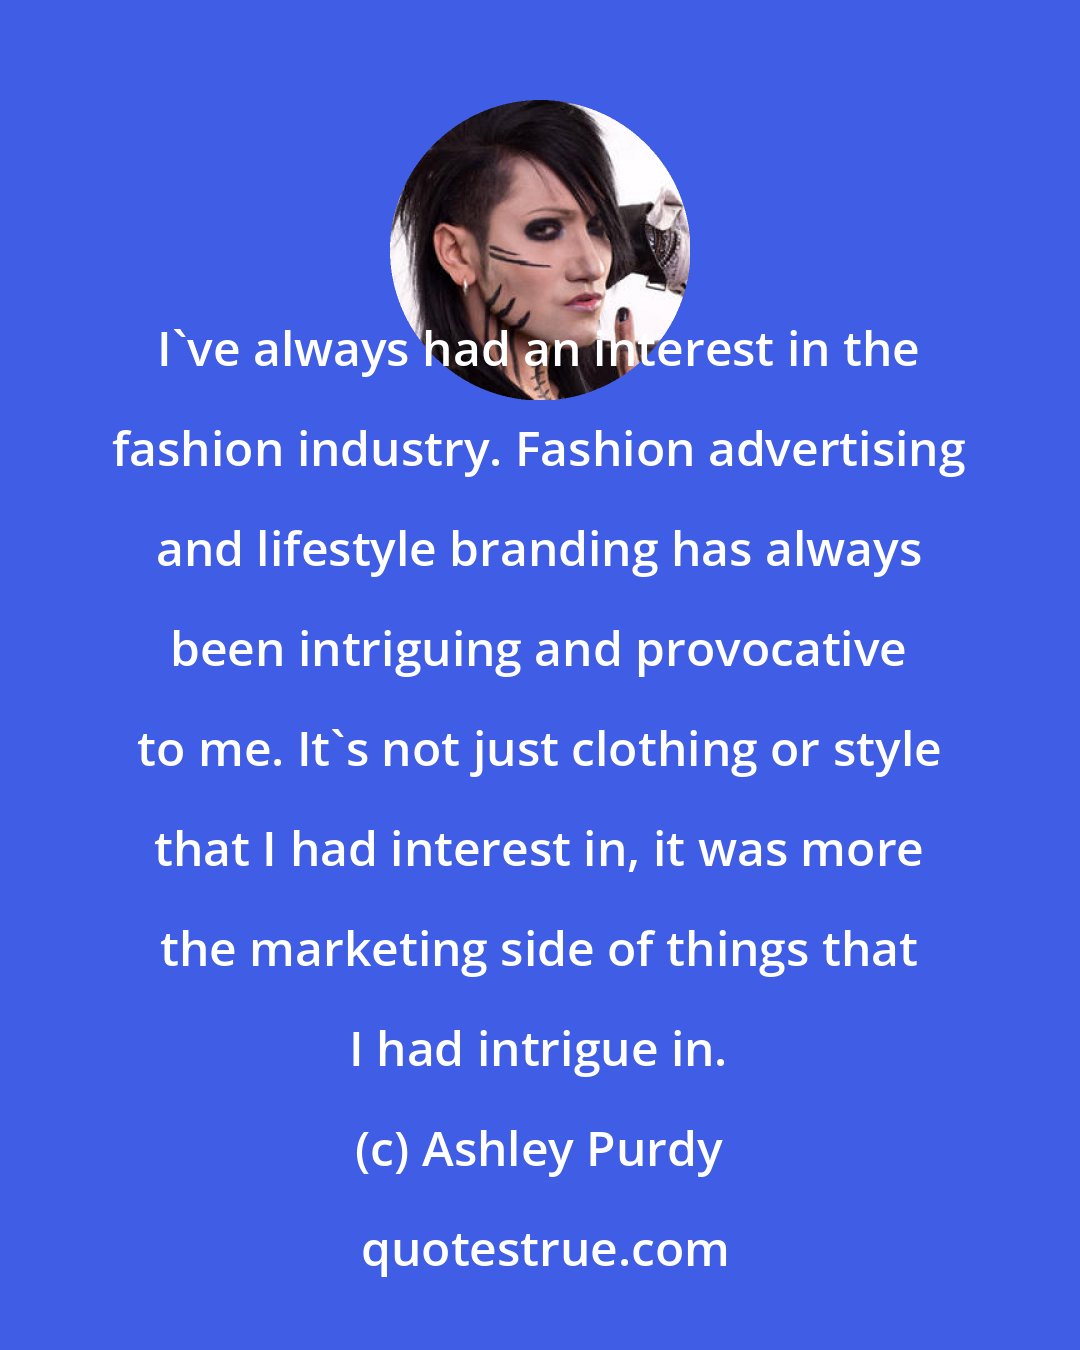 Ashley Purdy: I've always had an interest in the fashion industry. Fashion advertising and lifestyle branding has always been intriguing and provocative to me. It's not just clothing or style that I had interest in, it was more the marketing side of things that I had intrigue in.